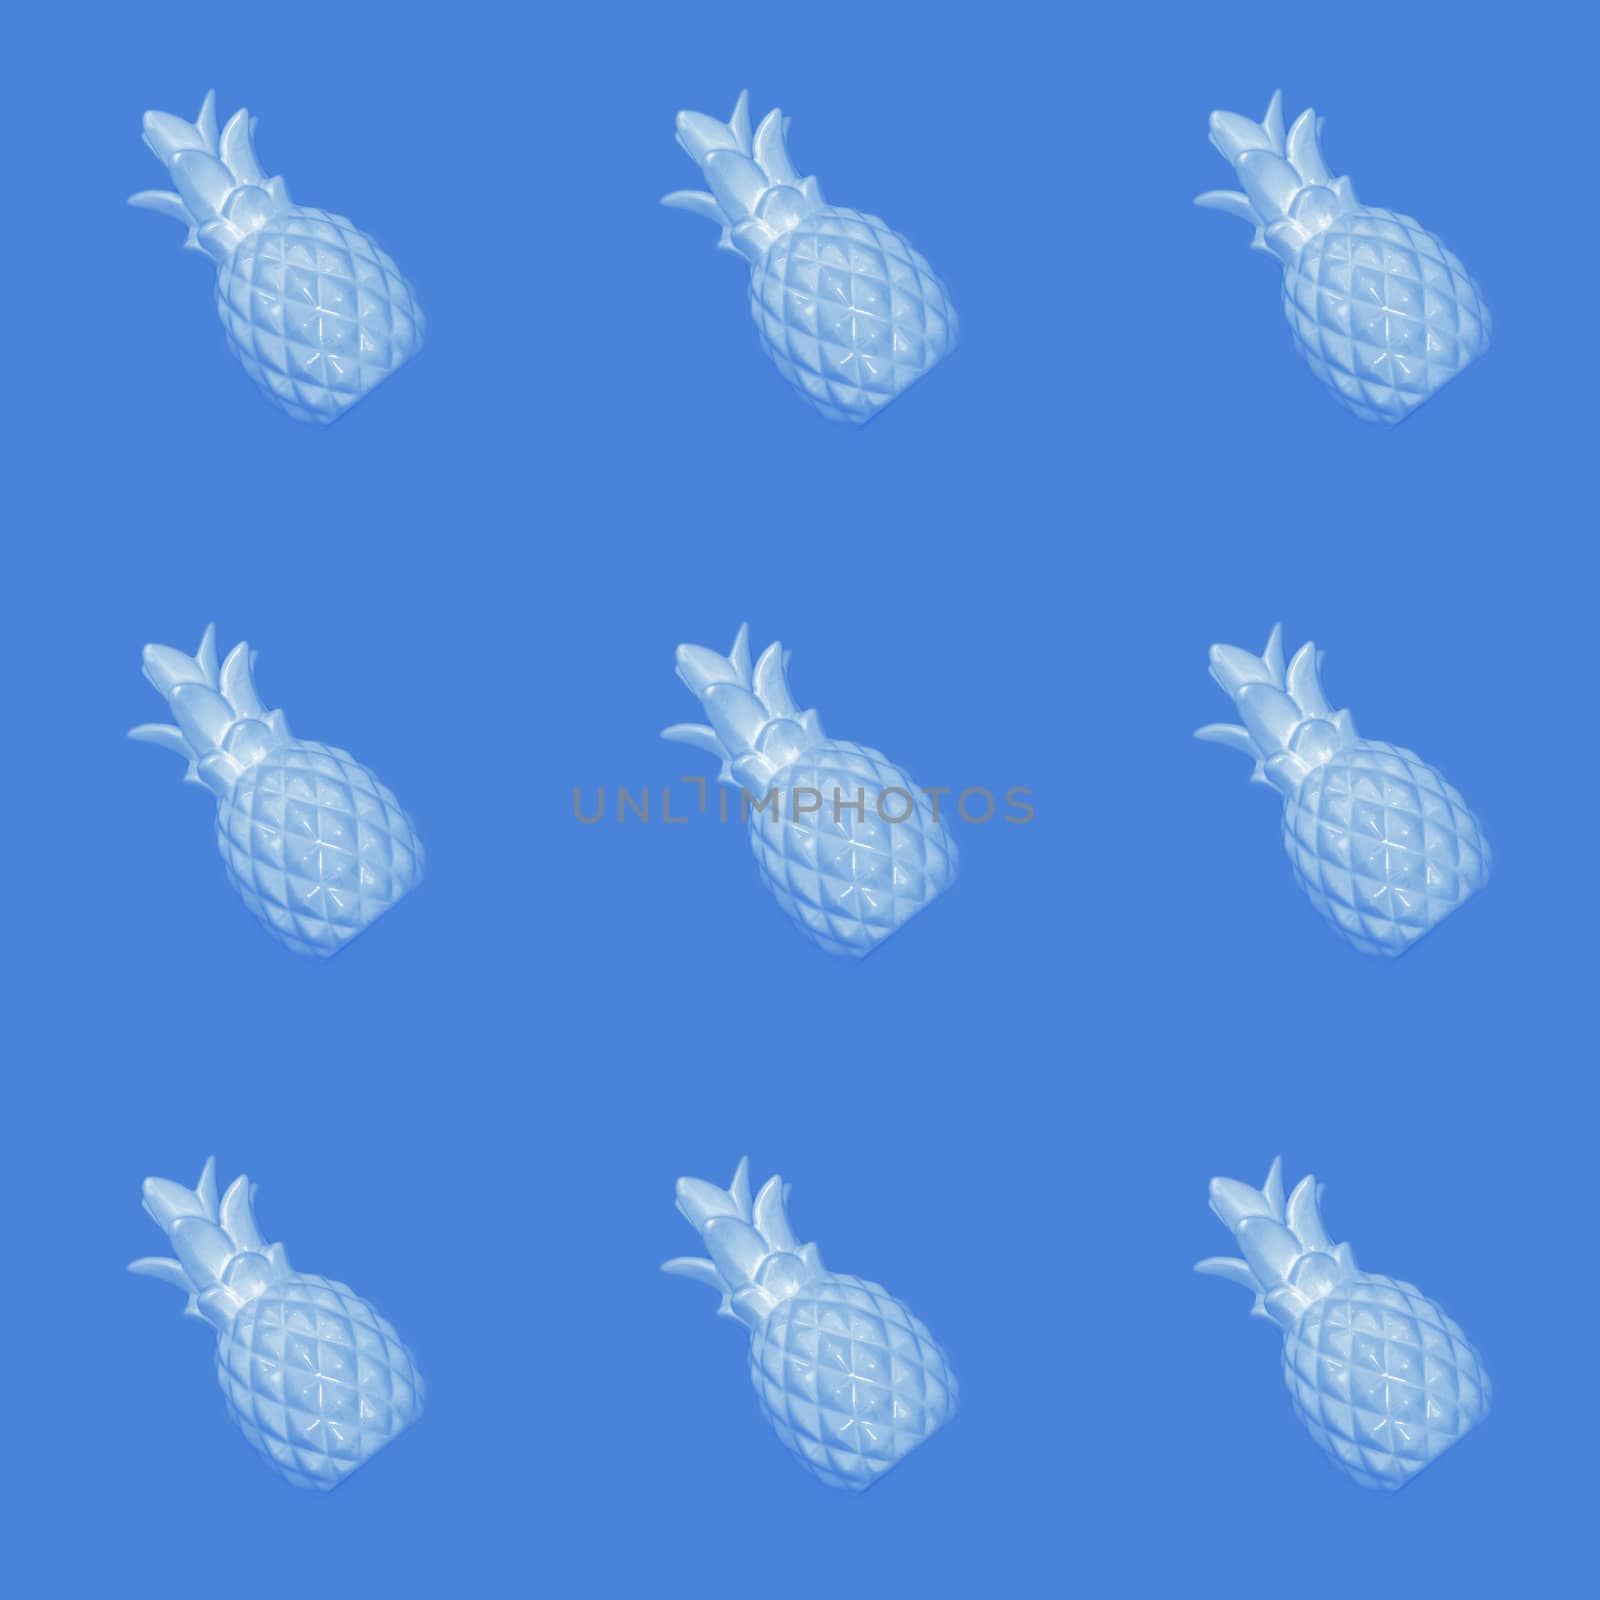 Seamless abstract background of blue pineapples on a blue background.